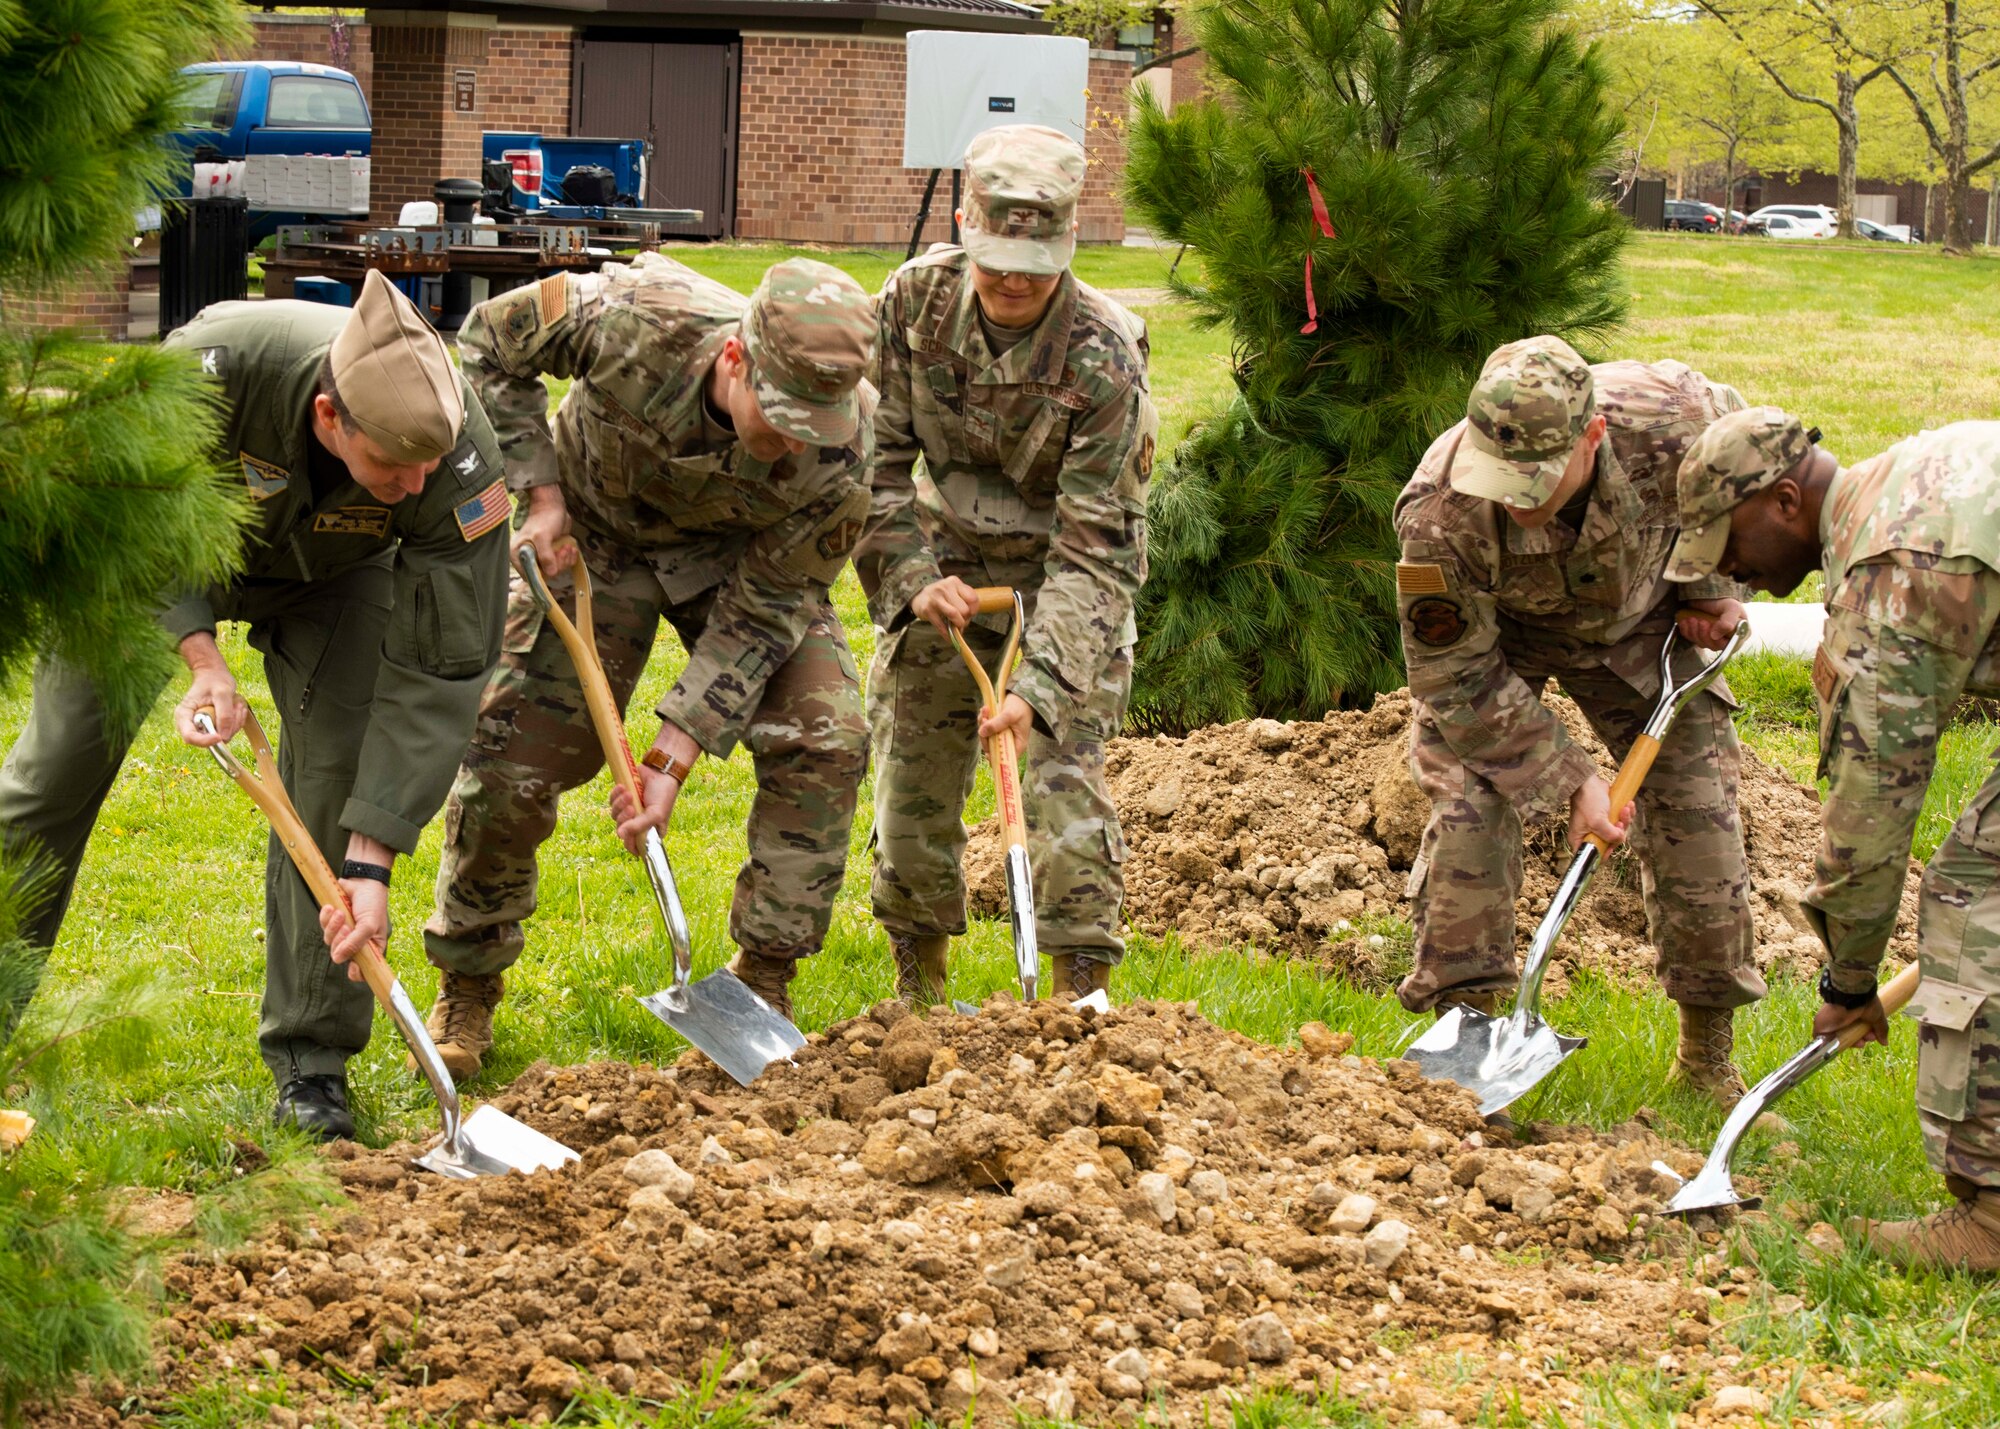 Joint Base Andrews leadership participate in a tree planting ceremony near the base dormitories at Joint Base Andrews, Md., April 21, 2022. Joint Base Andrews has held a tree planting event for 37 consecutive years. (U.S. Air Force photo by Airman 1st Class Matthew-John Braman)